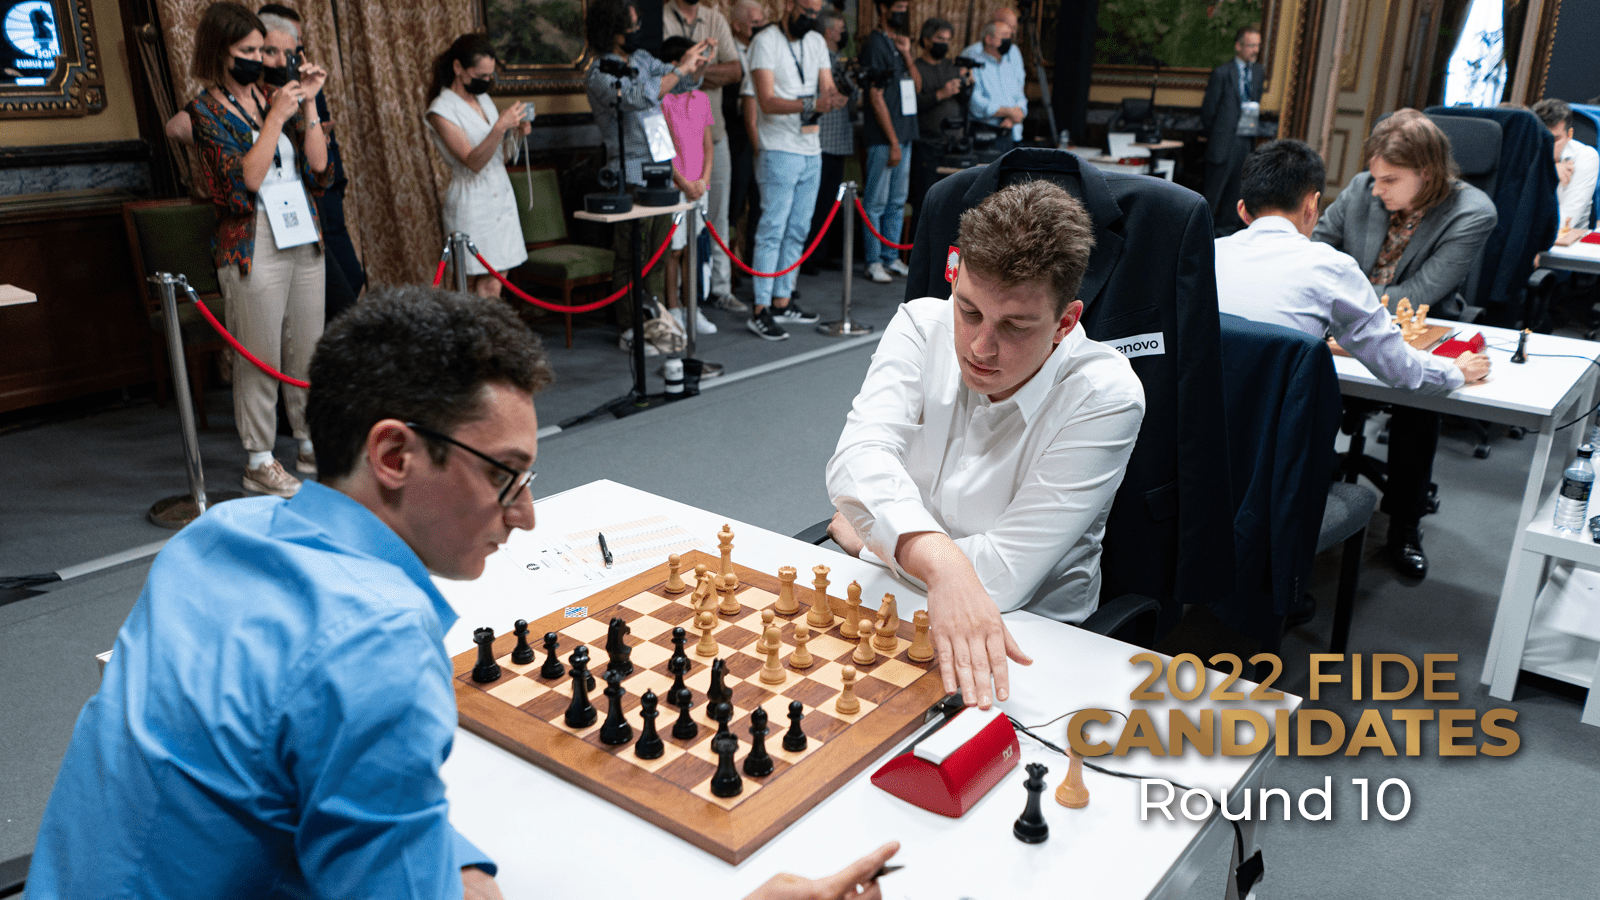 Caruana and Nepomniachtchi Win to Begin 2022 Candidates